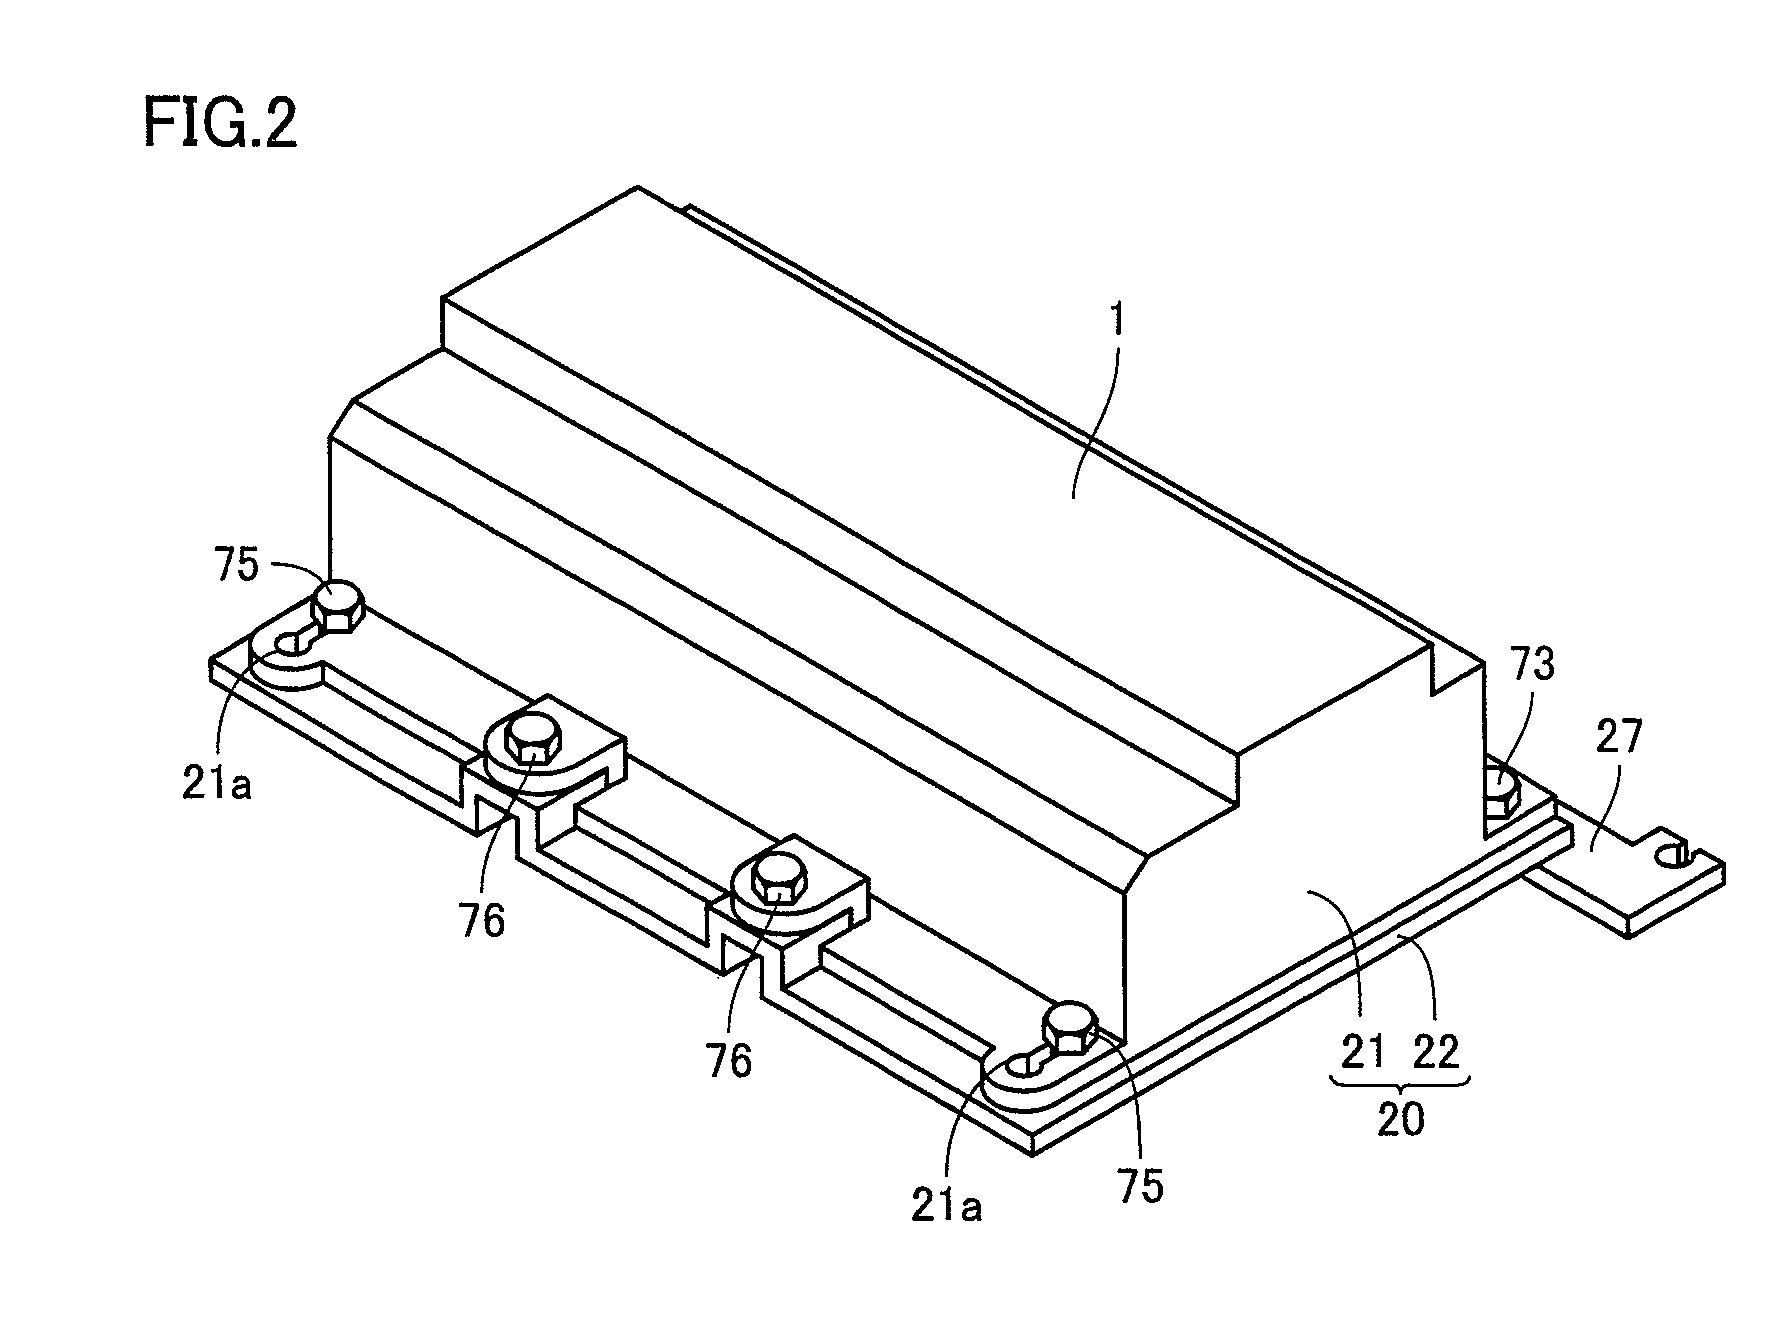 Structure mounting an electricity storage pack on a vehicle